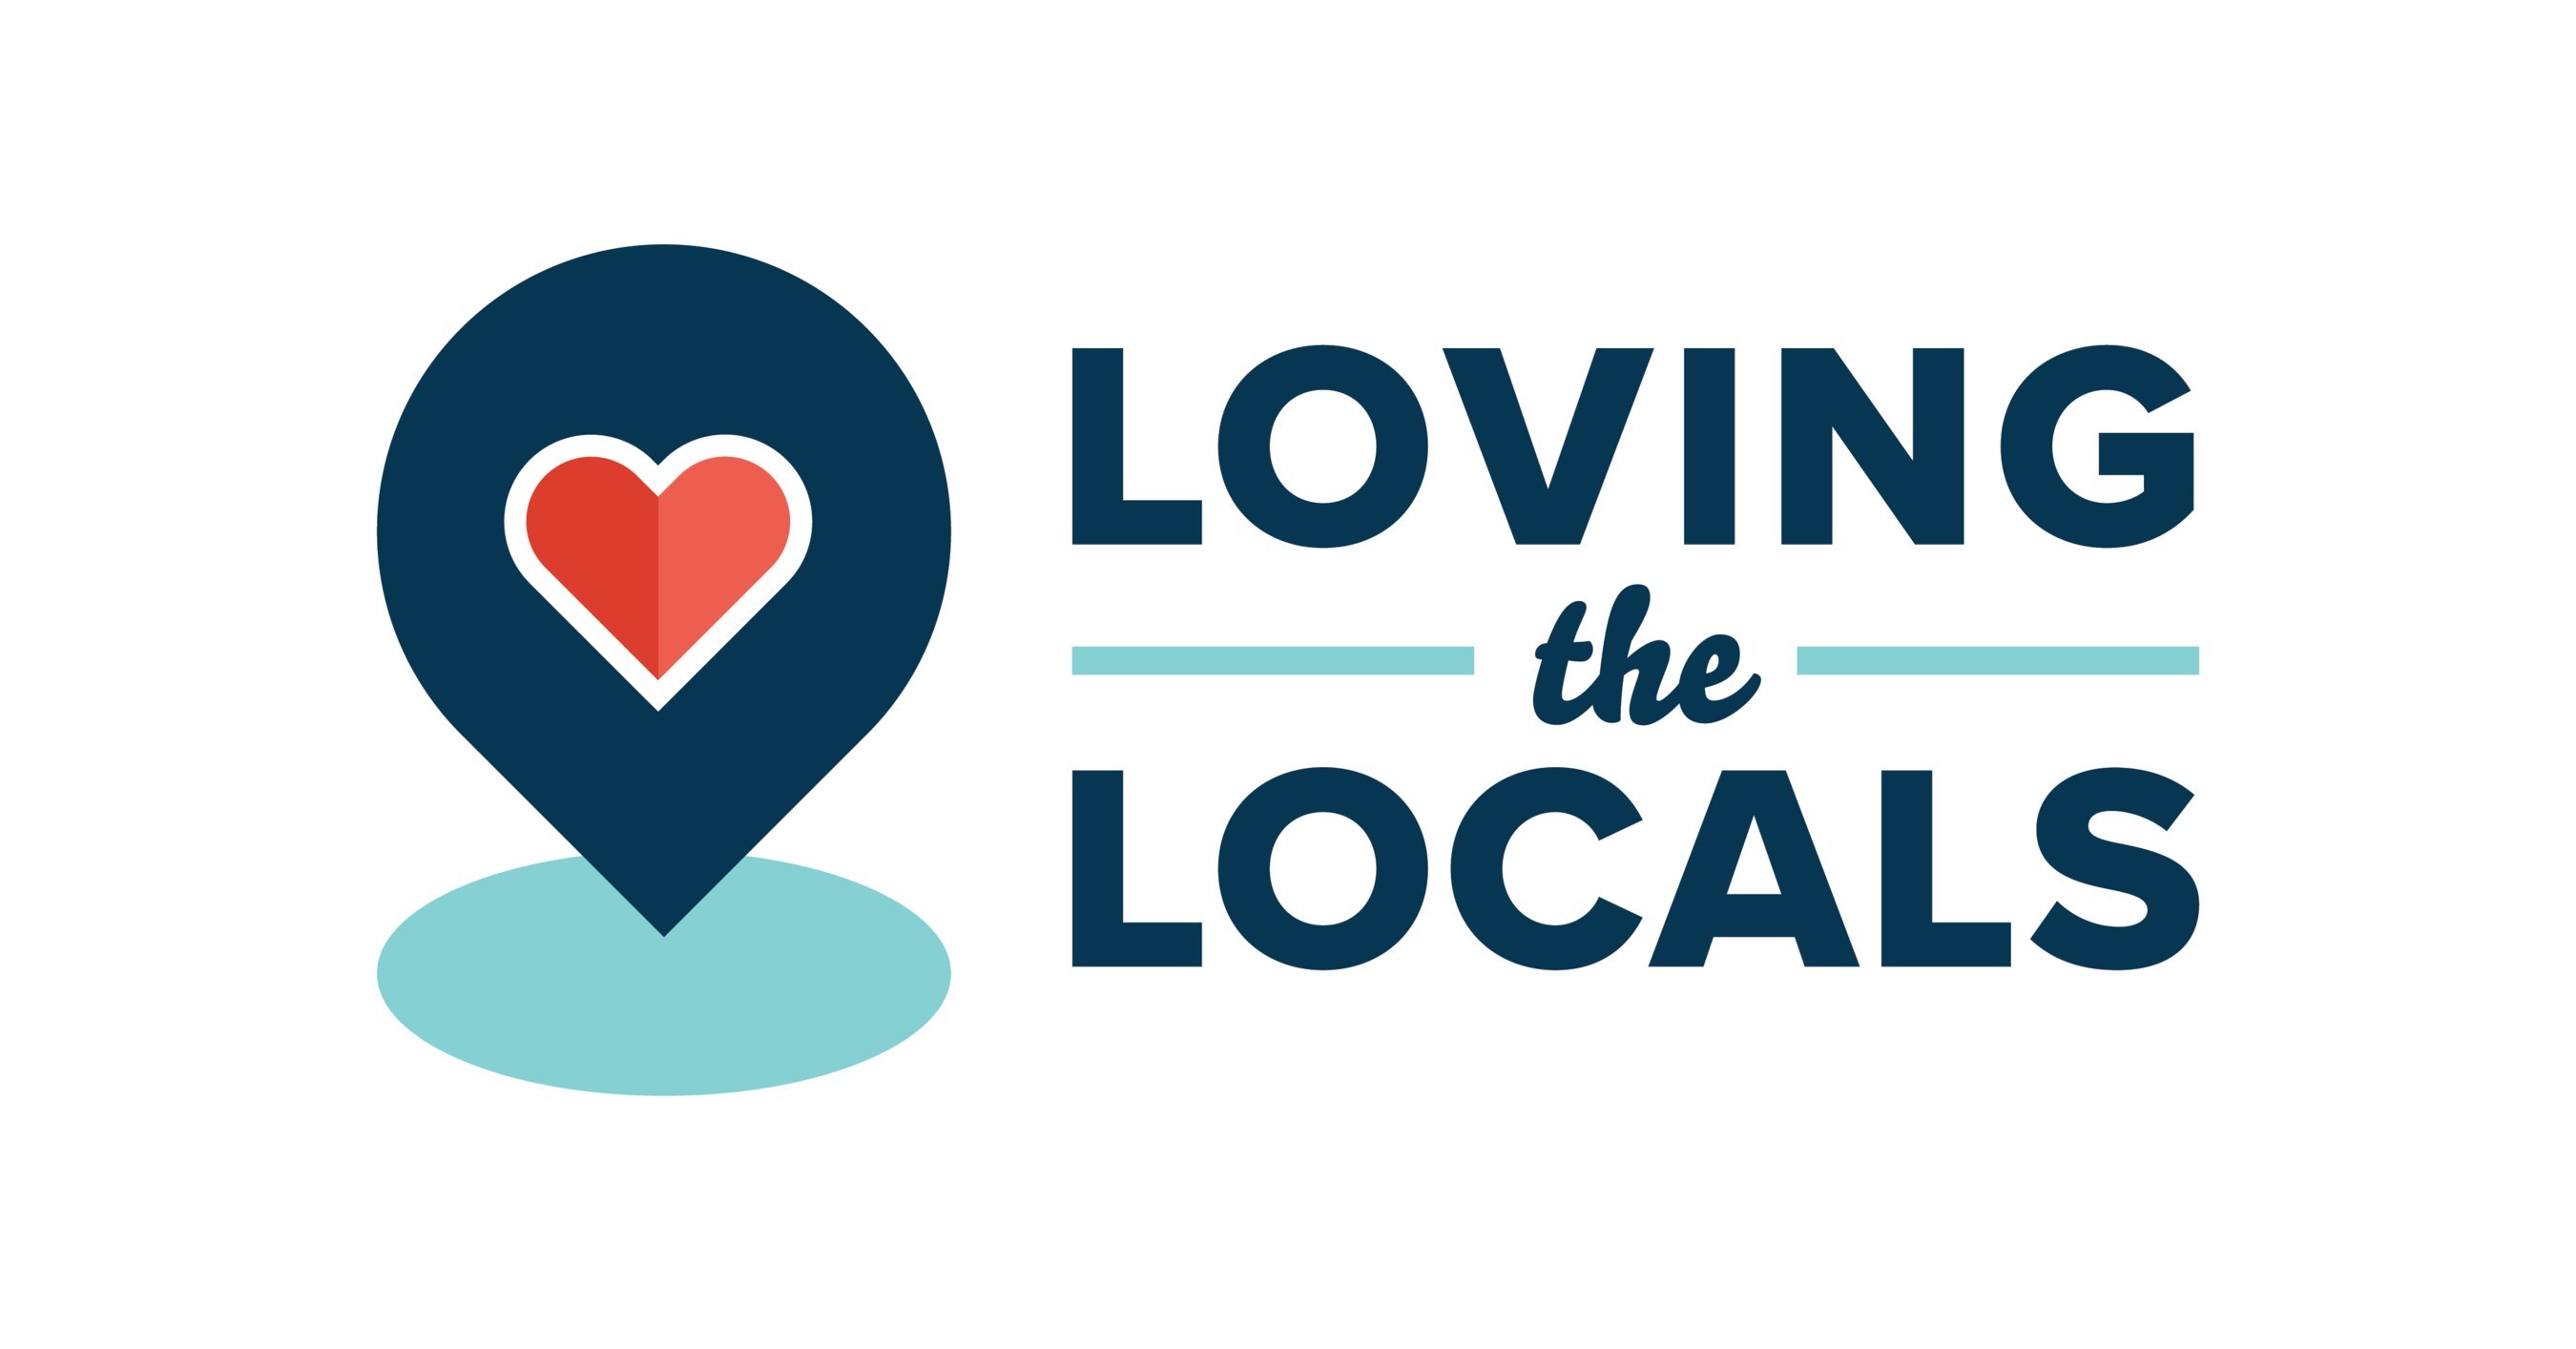 Brad's Deals Launches National 'Loving the Locals' Program